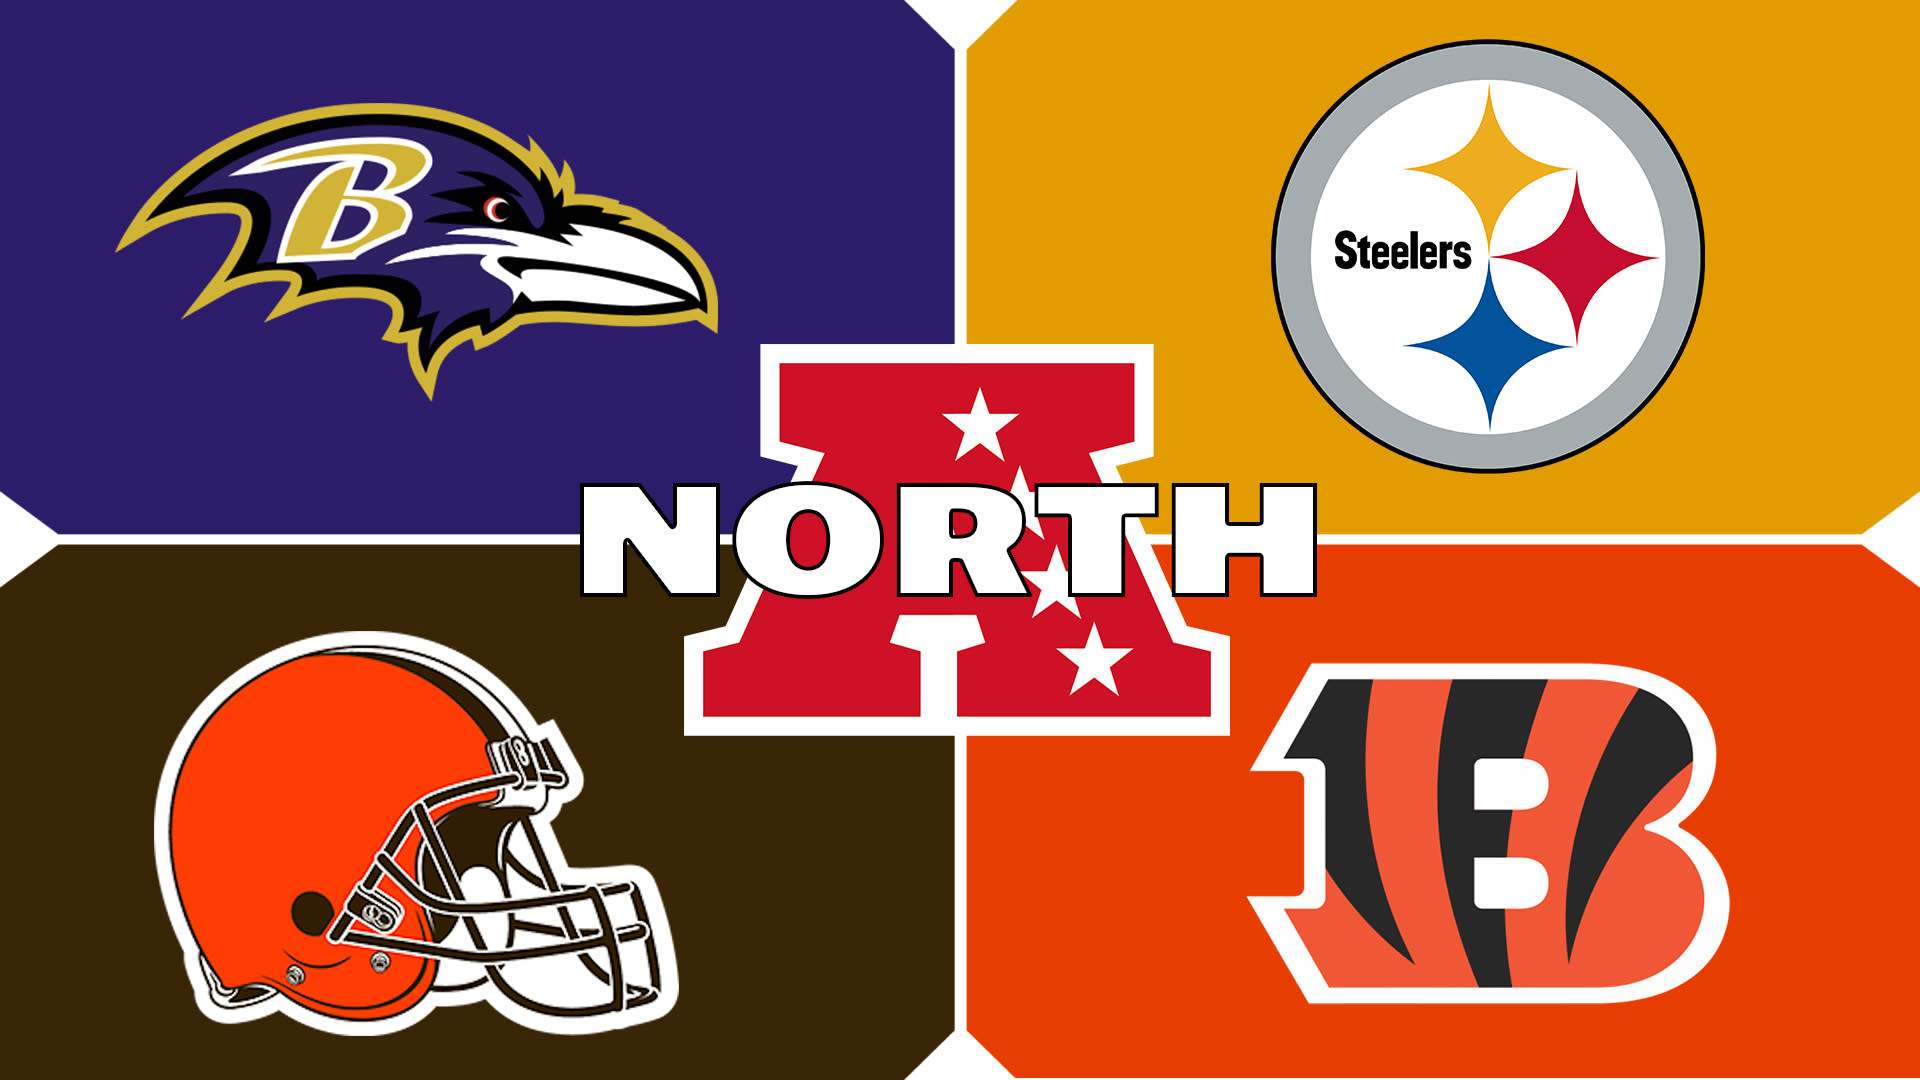 2020 NFL Preview: Ranking the 8 divisions, from easiest to toughest